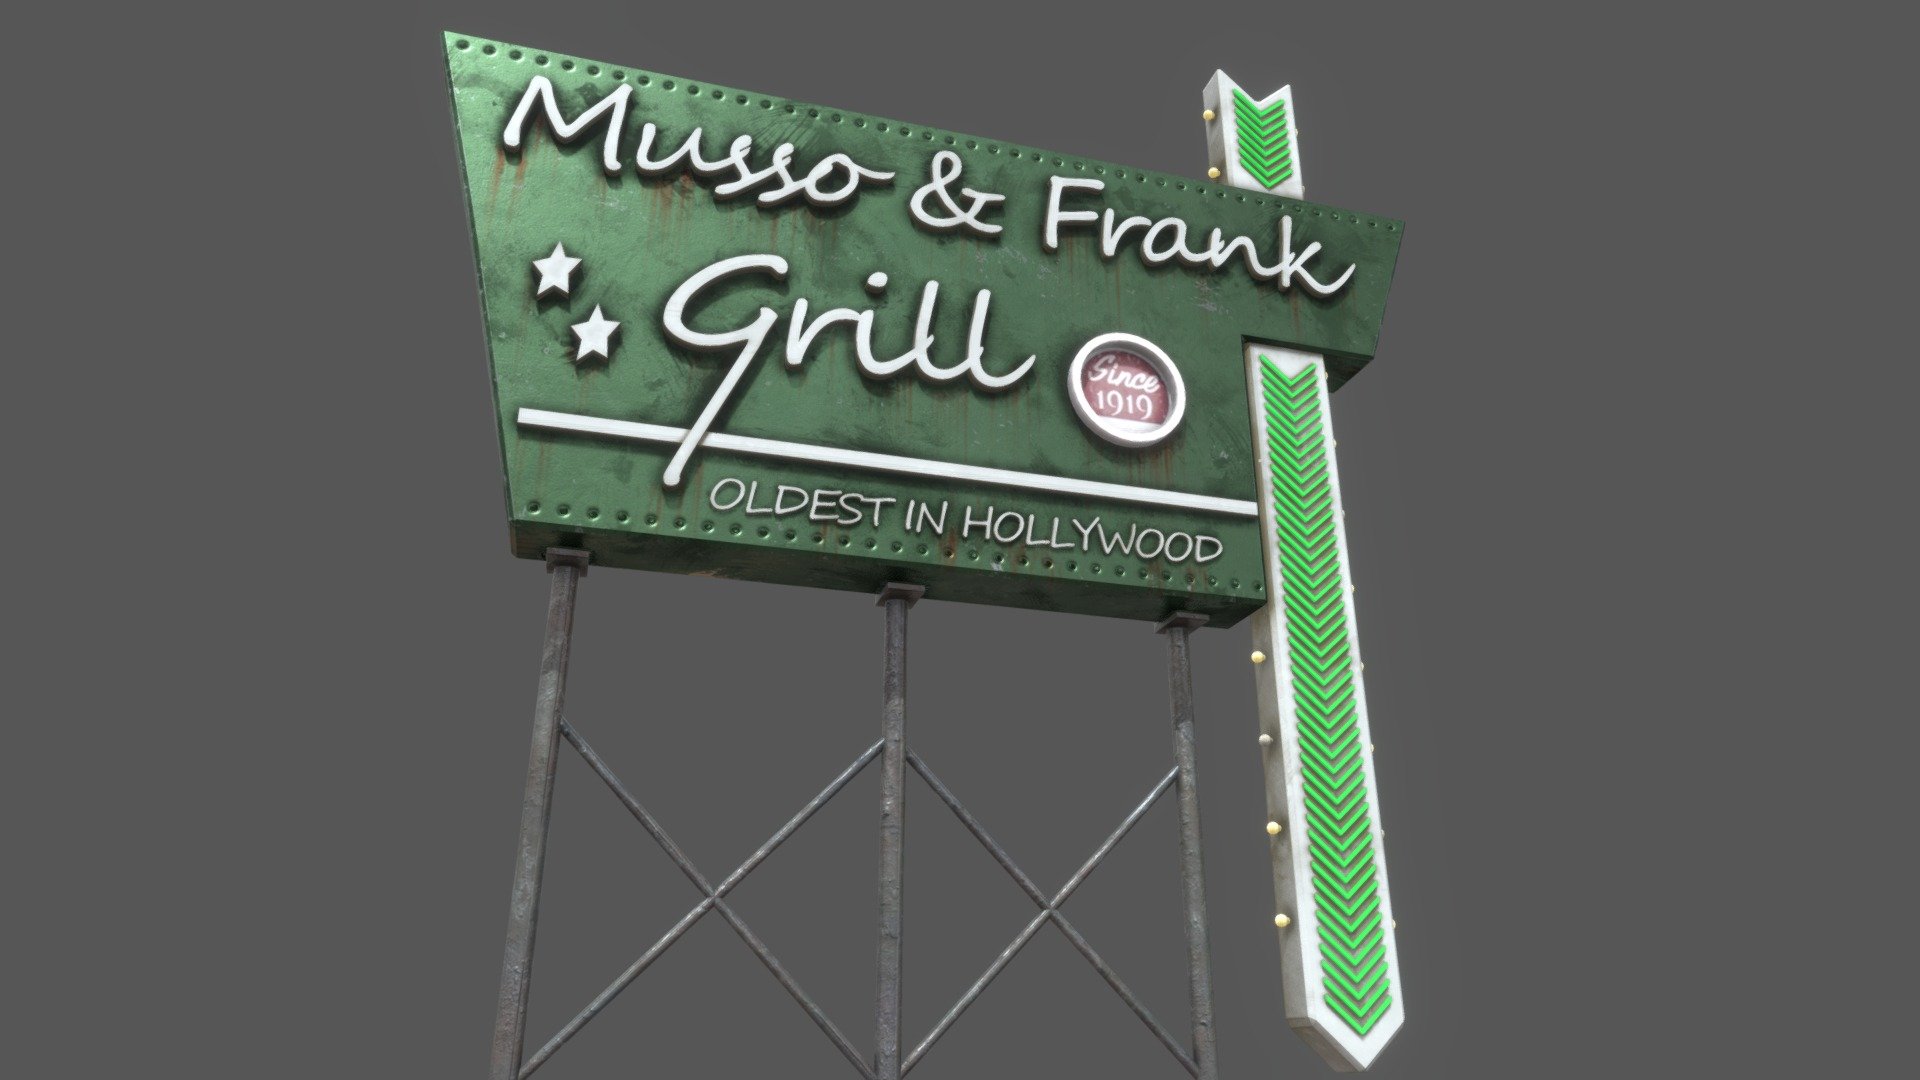 Signage to classic American fare &amp; martinis to diners in red booths at Hollywood's oldest eatery.

This is a large metal sign that usually sits atop a city building, advertising a restaurant 3d model